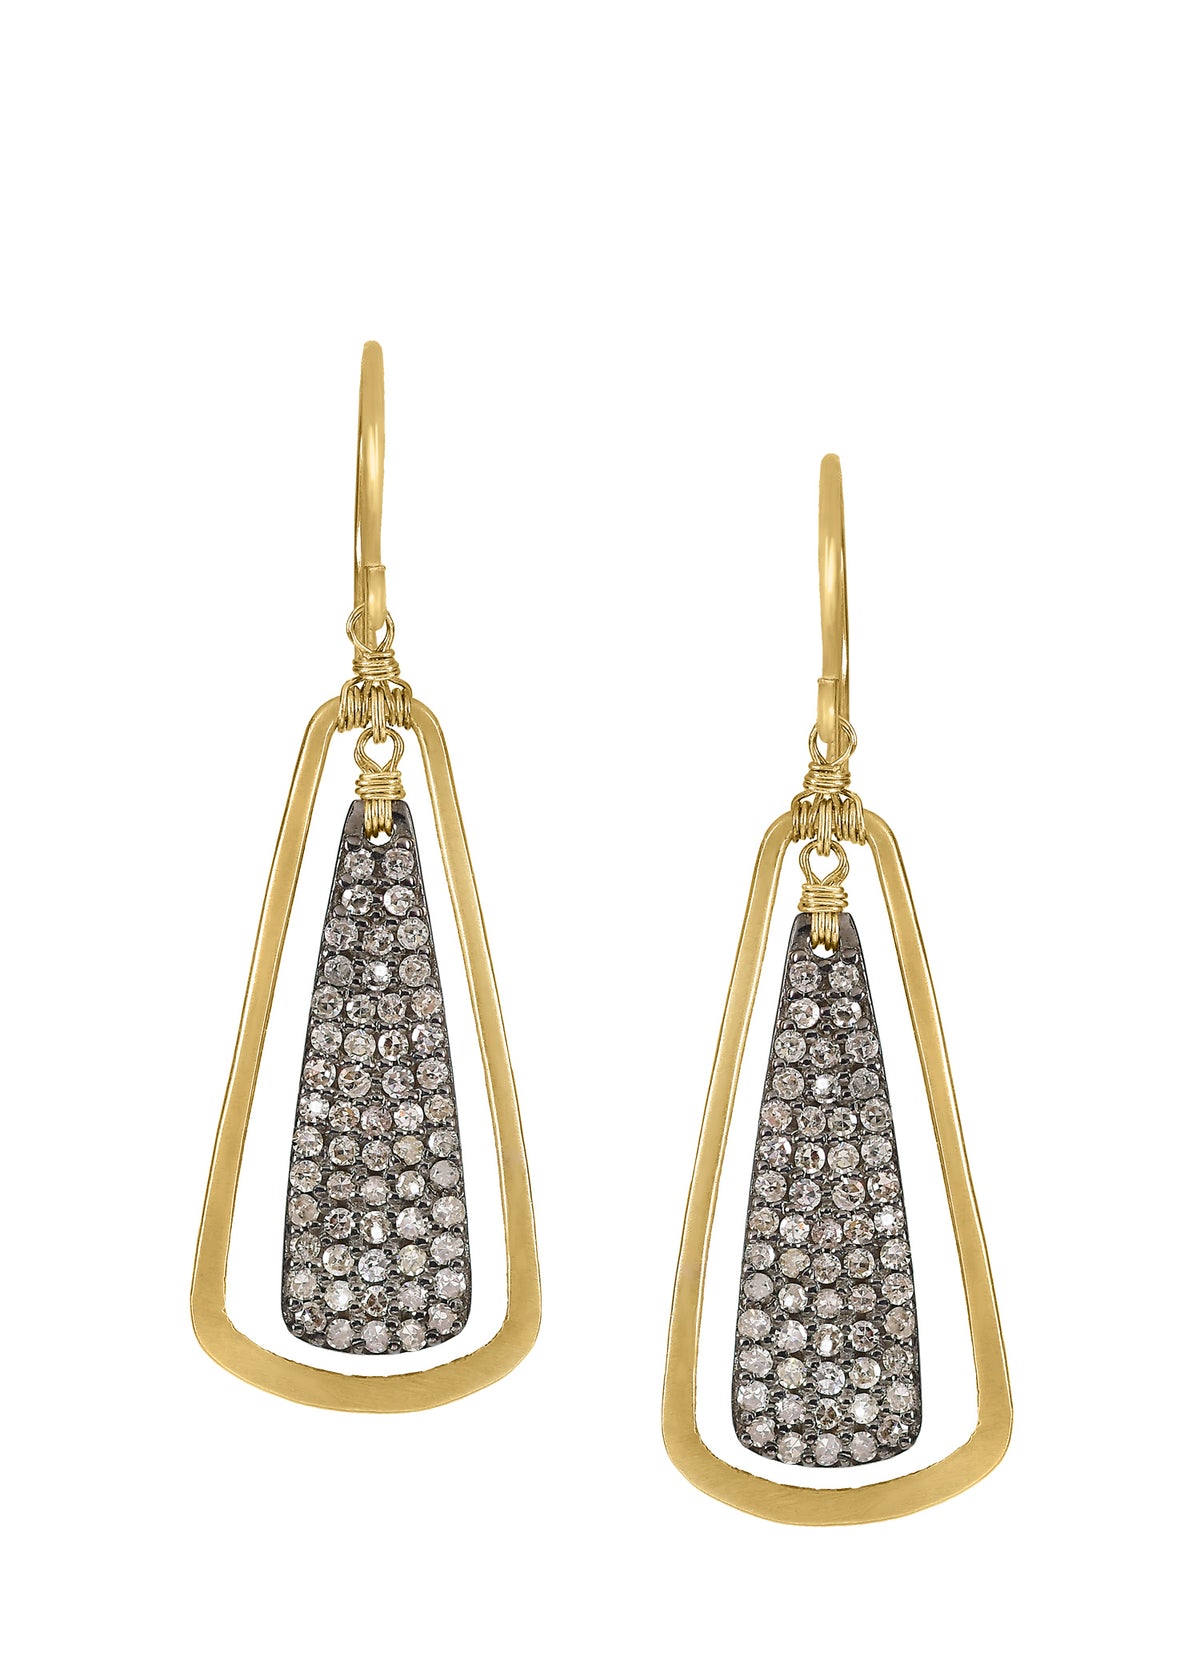 Diamond 14k gold Sterling silver Mixed metal Special order only Earrings measure 1-1/2&quot; in length (including the ear wires) and 1/2&quot; in width at the widest point Handmade in our Los Angeles studio